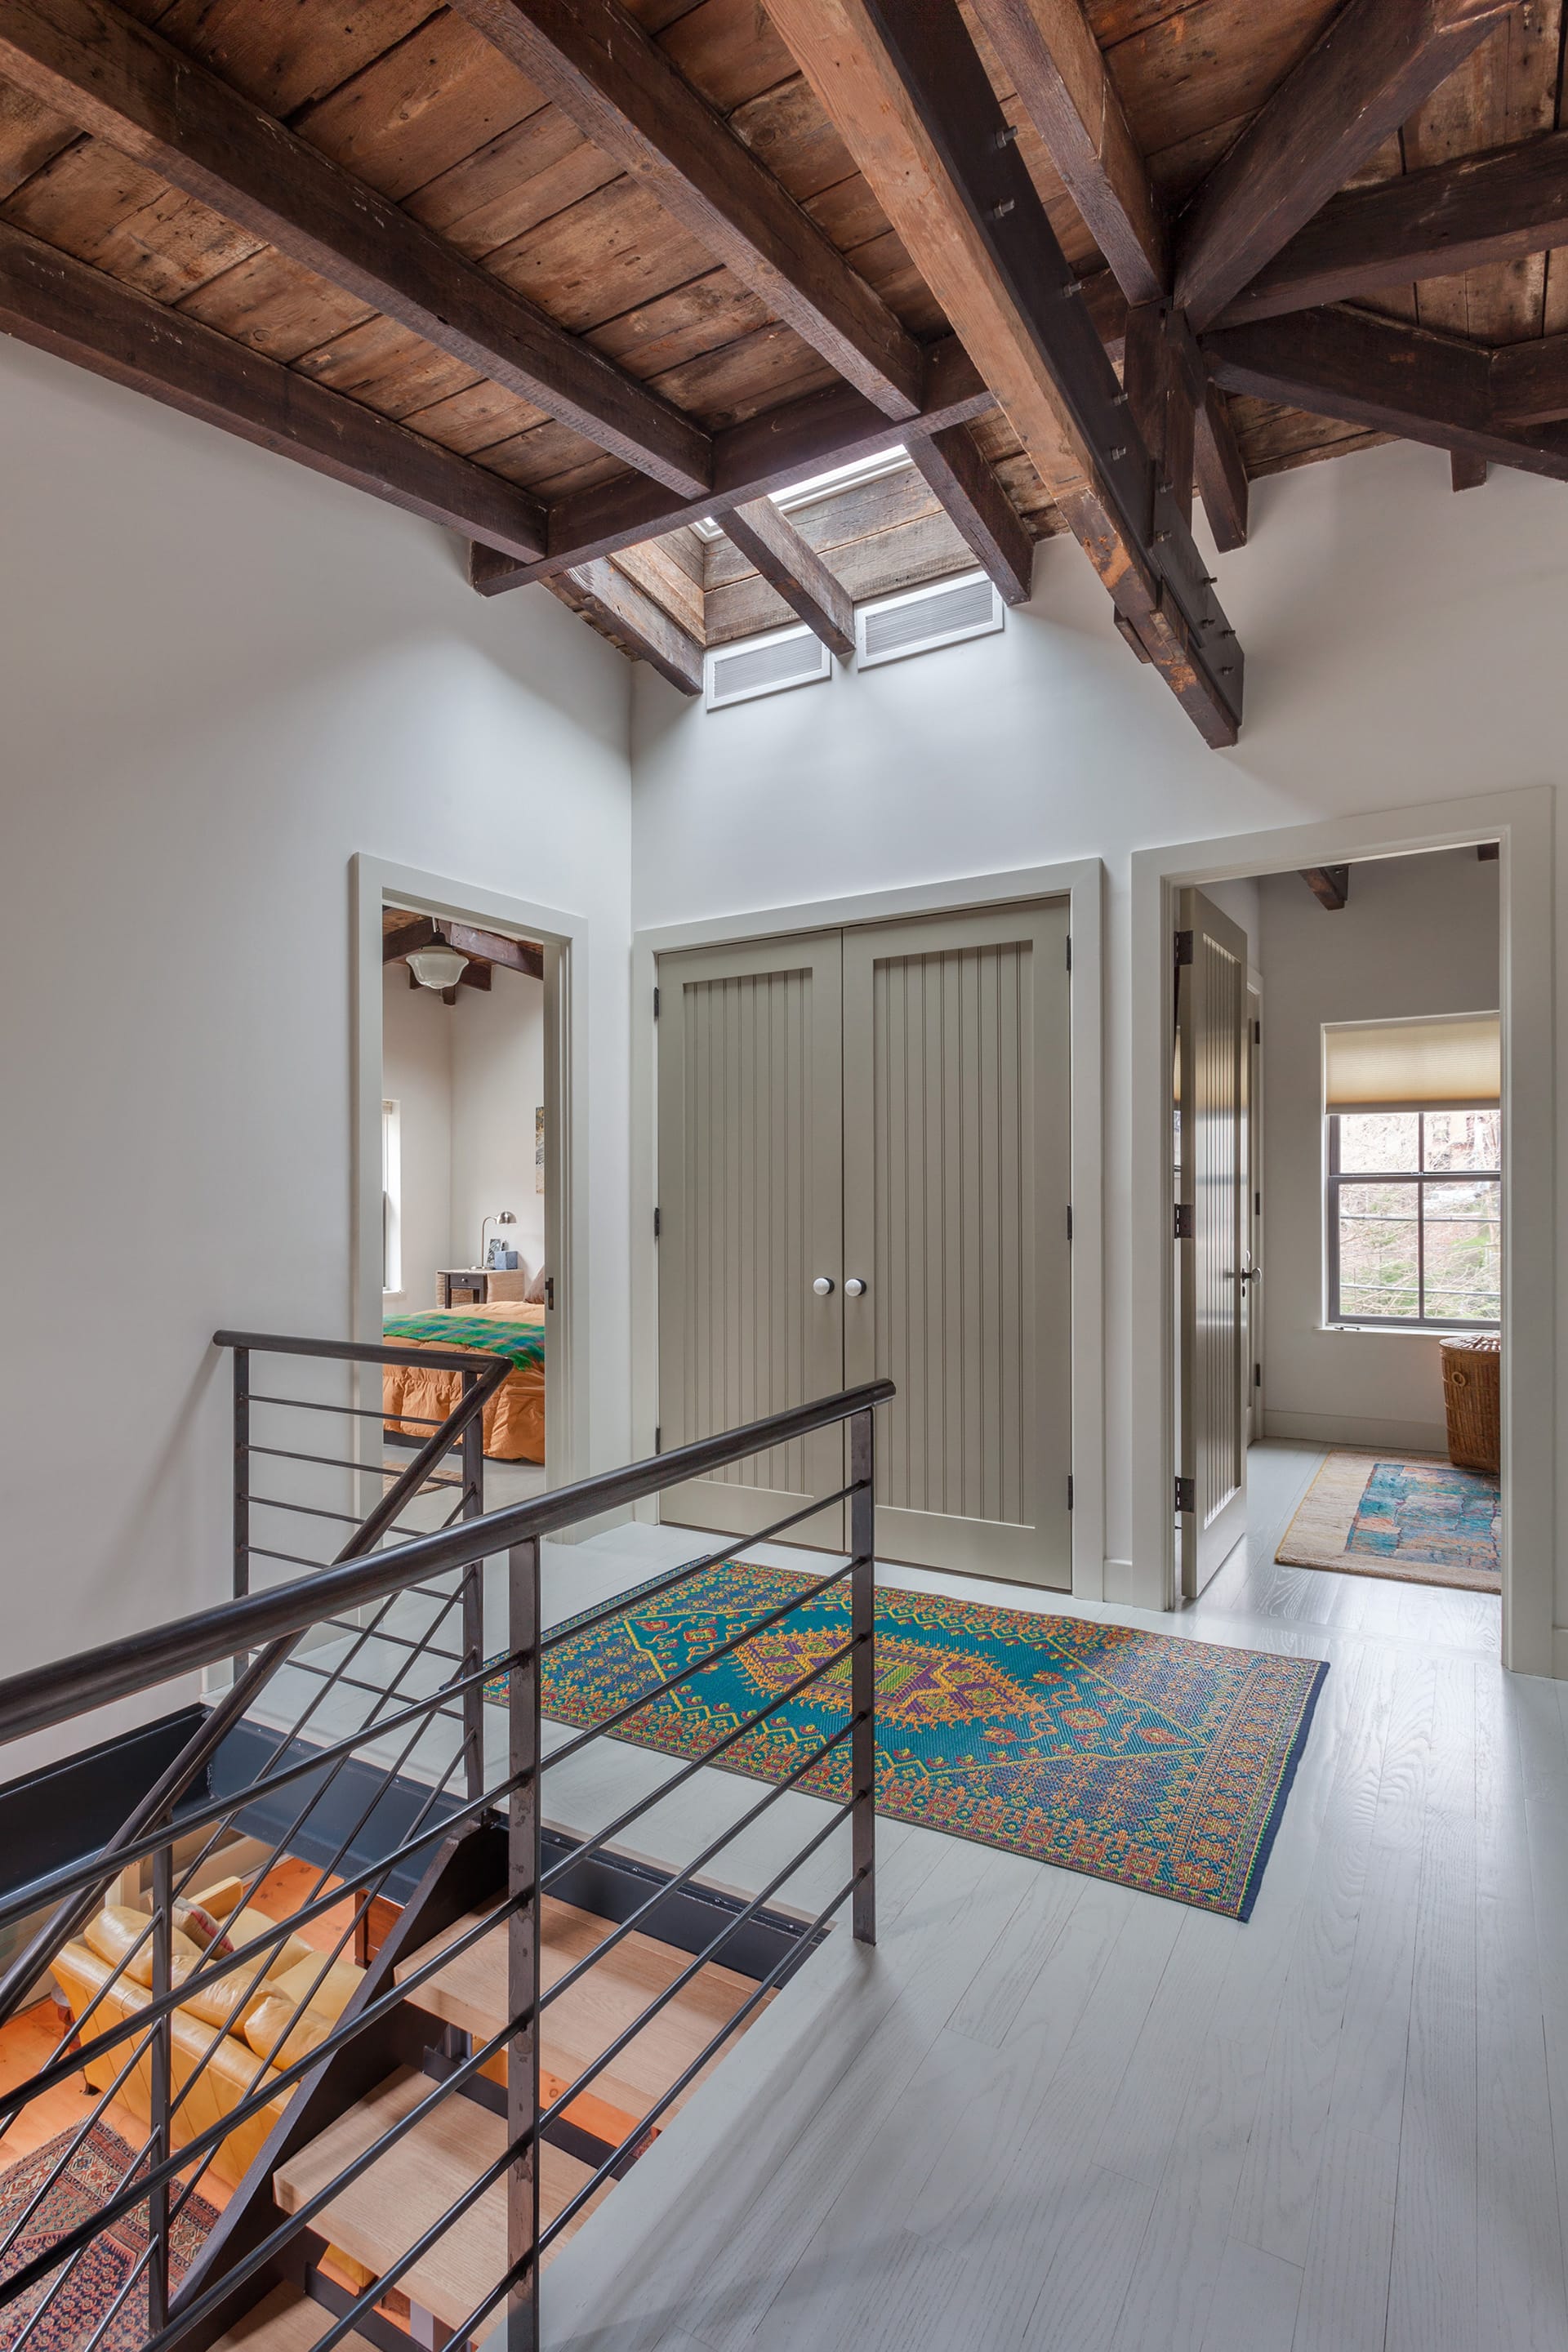 Second-floor stair landing with exposed ceiling beams, a skylight above the staircase, and grey wood floors.